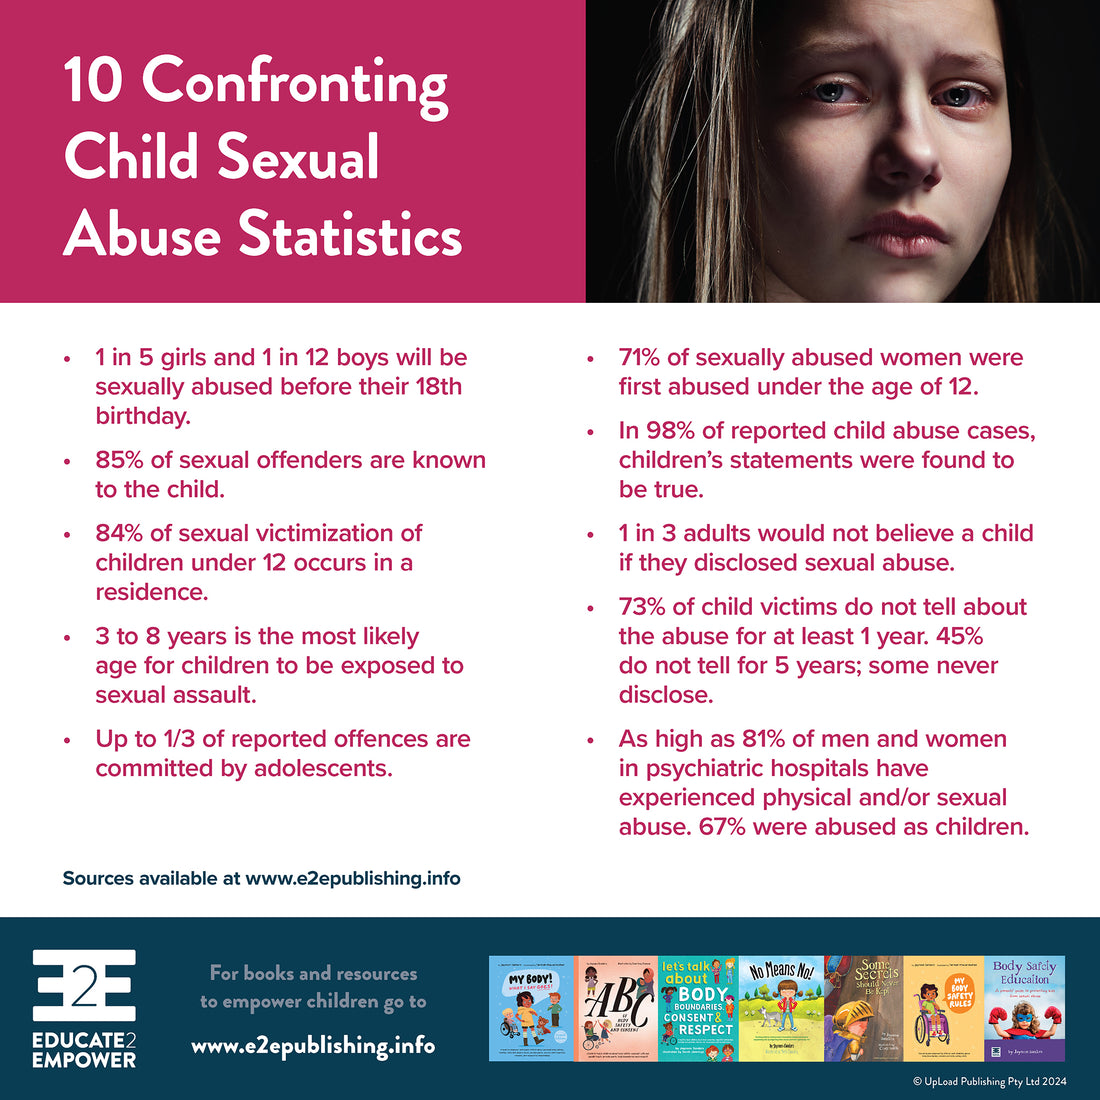 10 Confronting Child Sexual Abuse Statistics